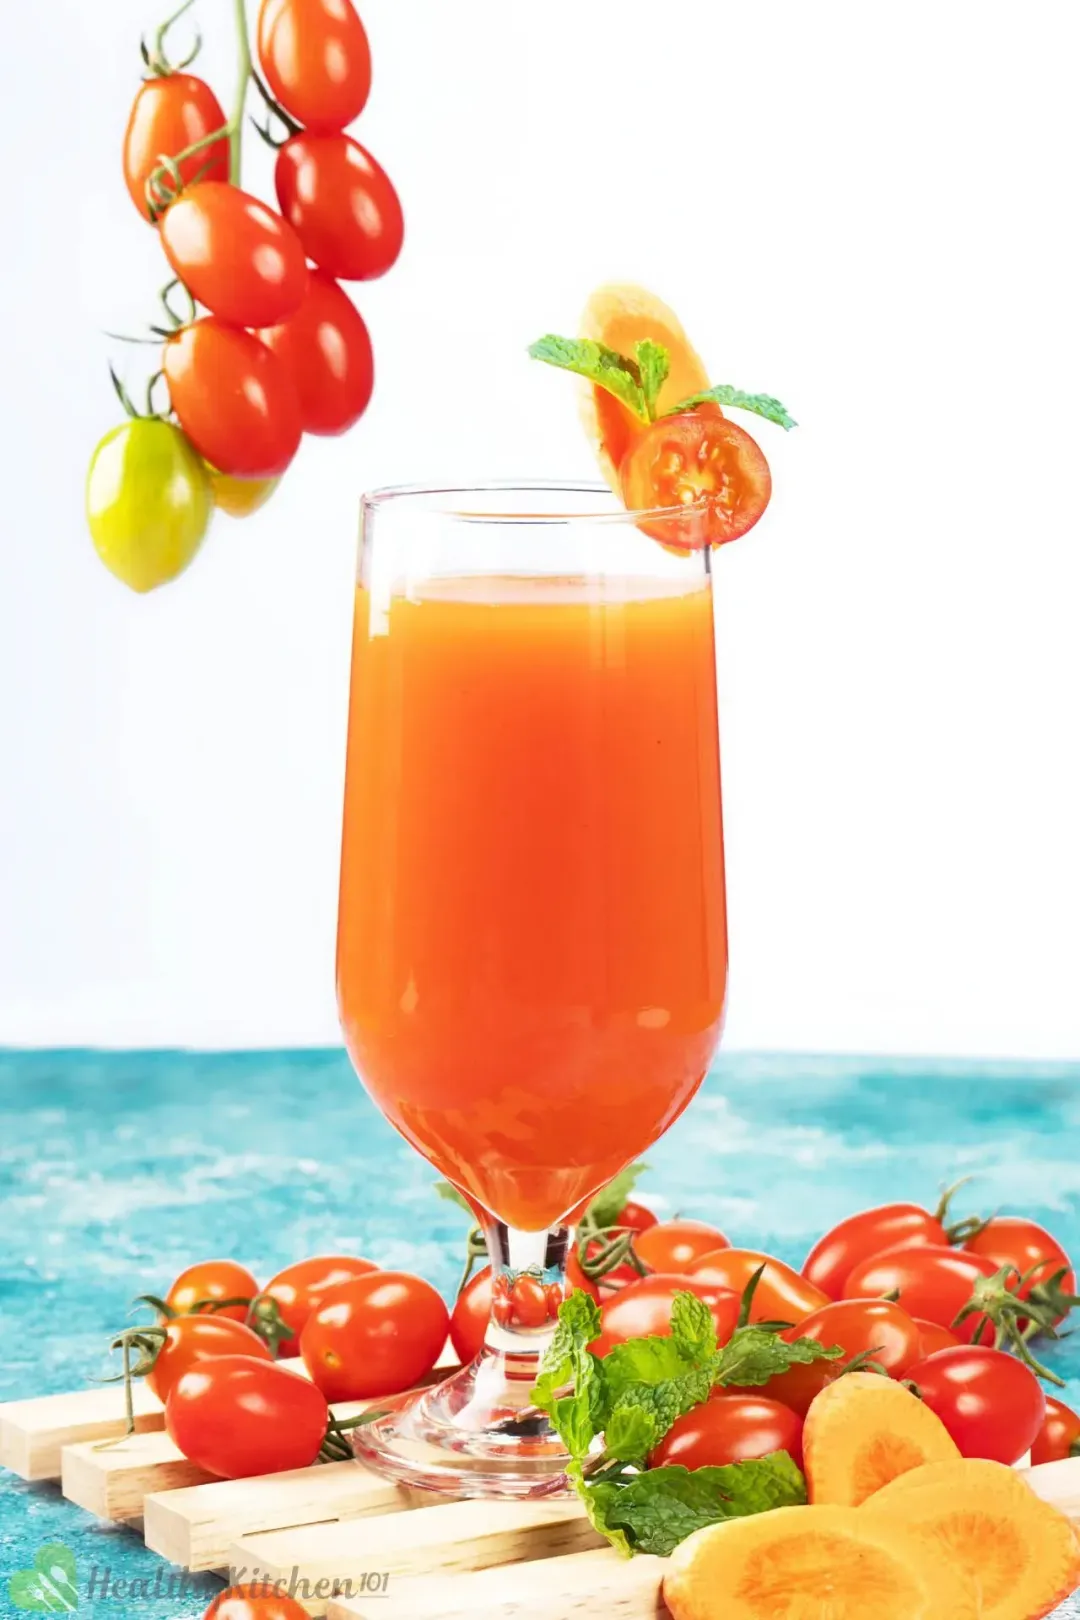 A glass of carrot tomato juice surrounded by lots of cherry tomatoes on vine, on a blue table